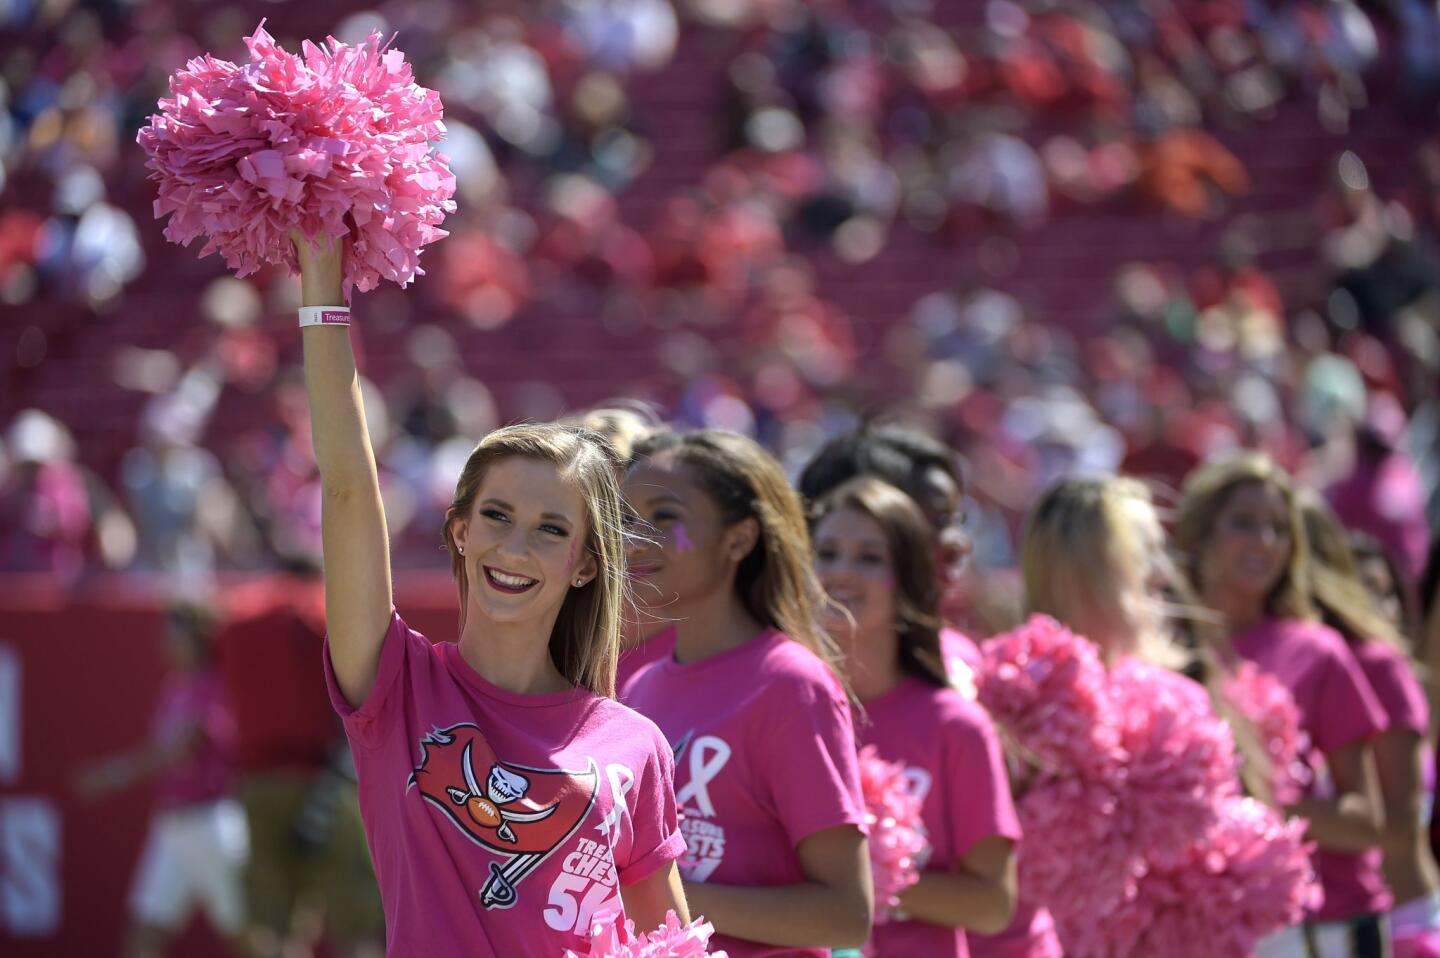 University of South Florida cheerleaders participate in a production in support of Breast Cancer Awareness Month during halftime of an NFL football game between the Tampa Bay Buccaneers and the Jacksonville Jaguars in Tampa, Fla., Sunday, Oct. 11, 2015. (AP Photo/Phelan M. Ebenhack)